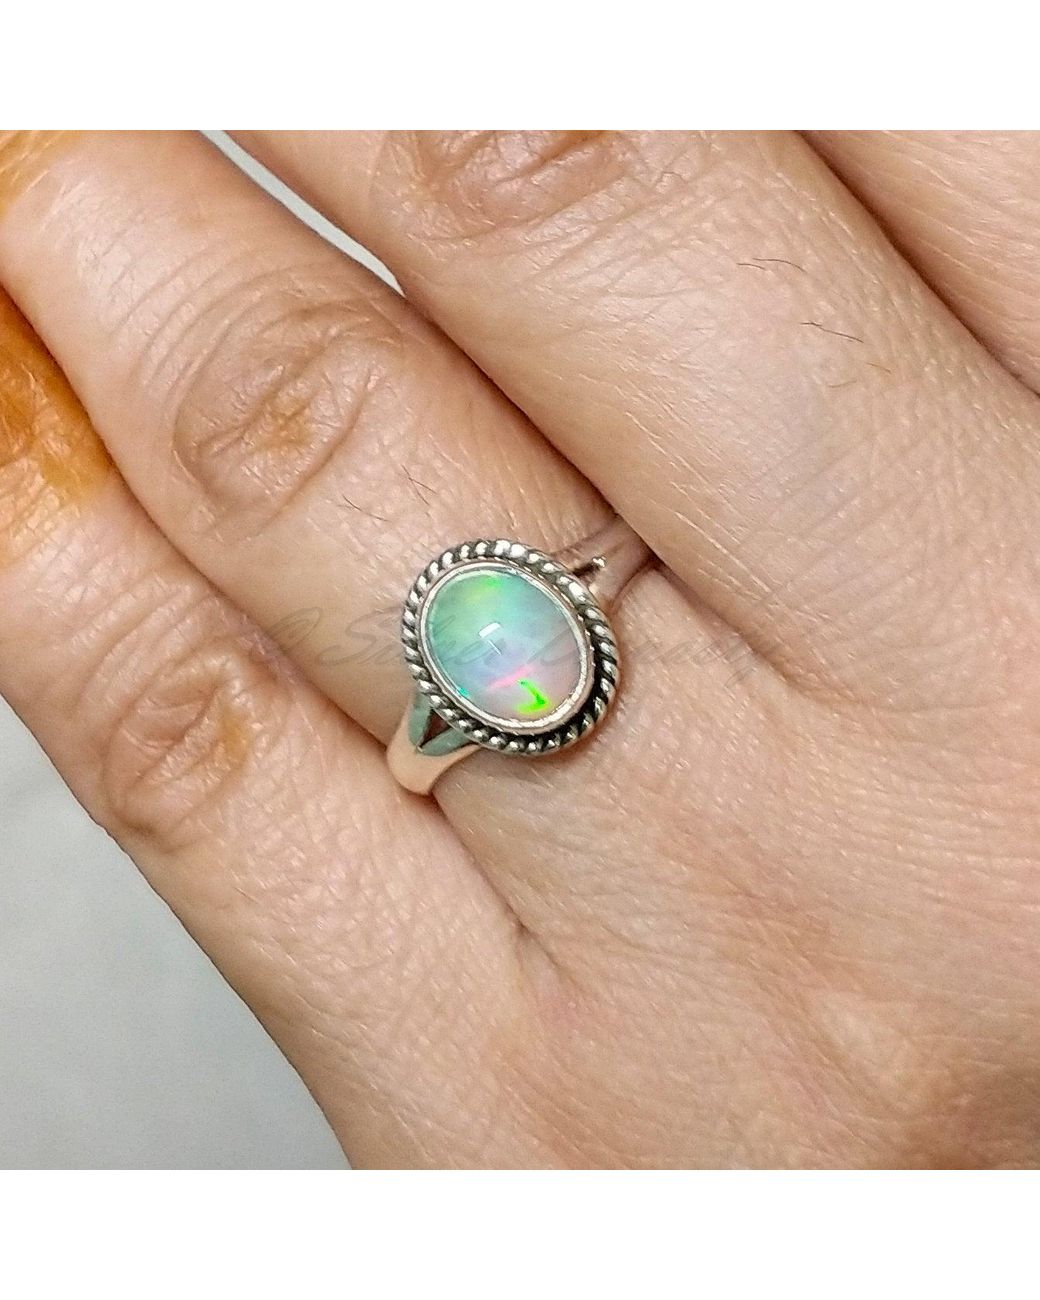 Gem Stone Jewelry Rose Gold Plated Gold Ring Natural Ethiopian Opal Ring Hammered Gemstone Rings Opal Ring